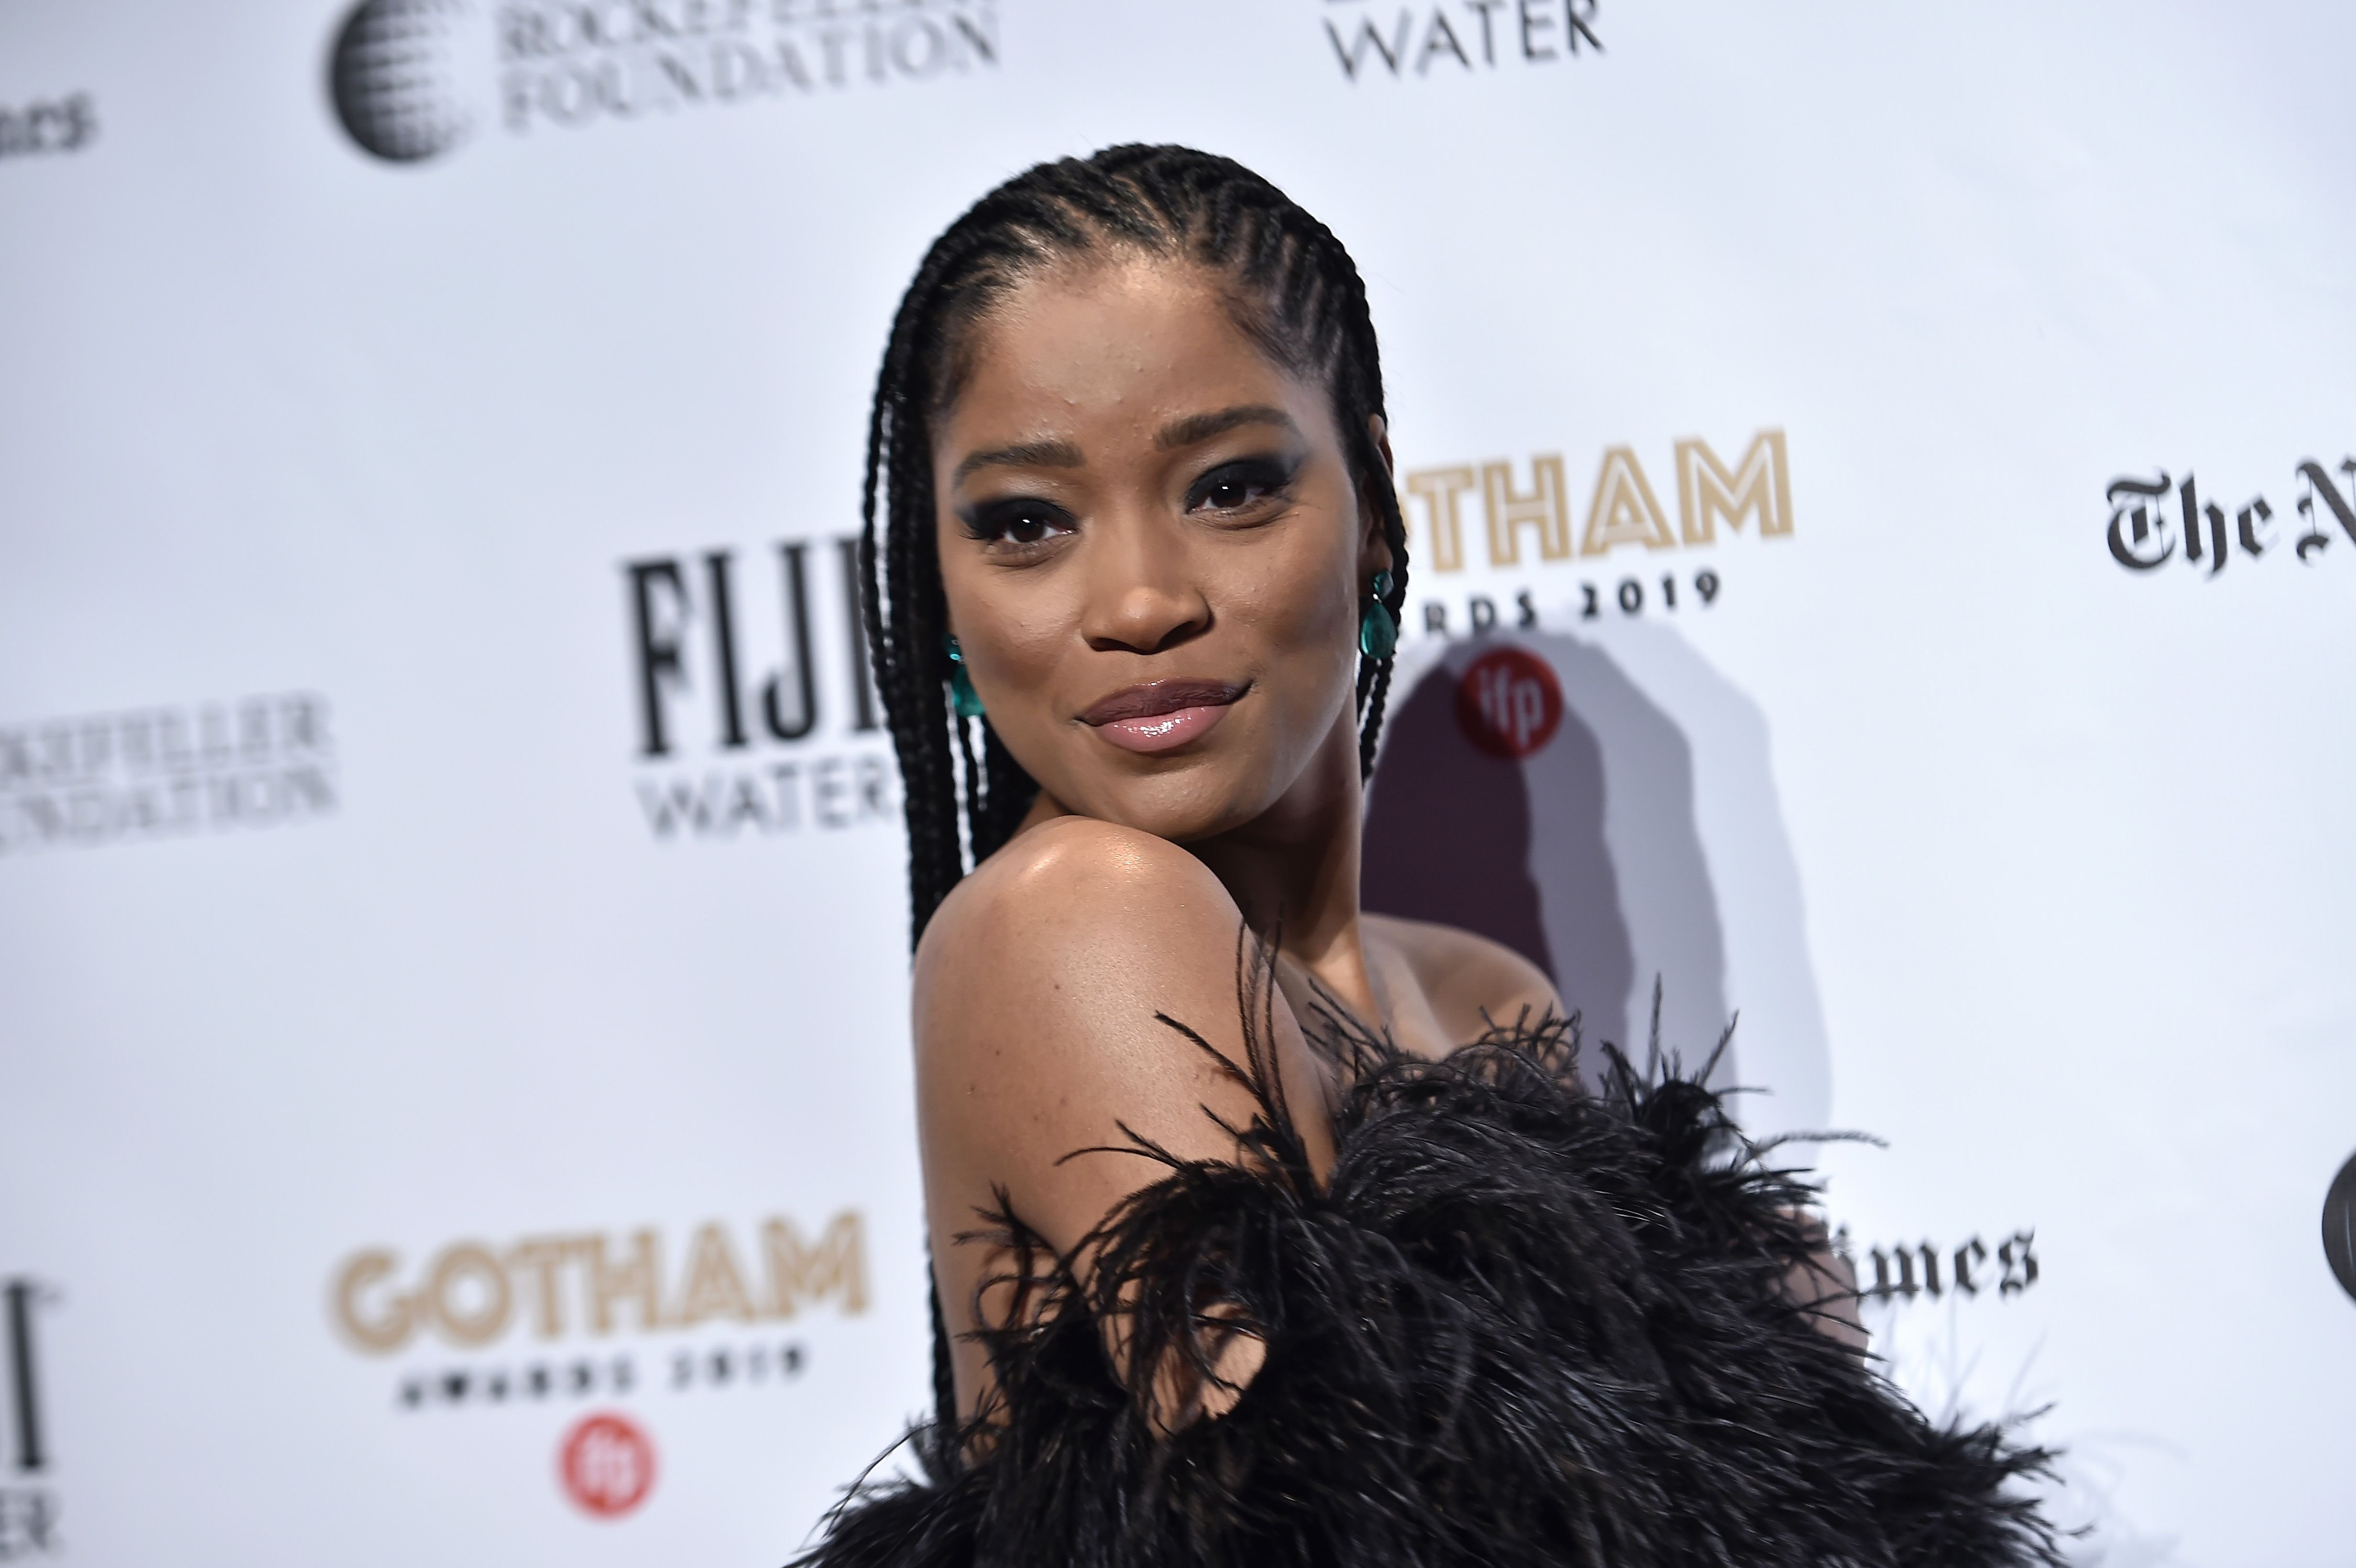 Keke Palmer arrives on the red carpet at the IFP Gotham Awards on December 02, 2019. | Photo: Getty Images